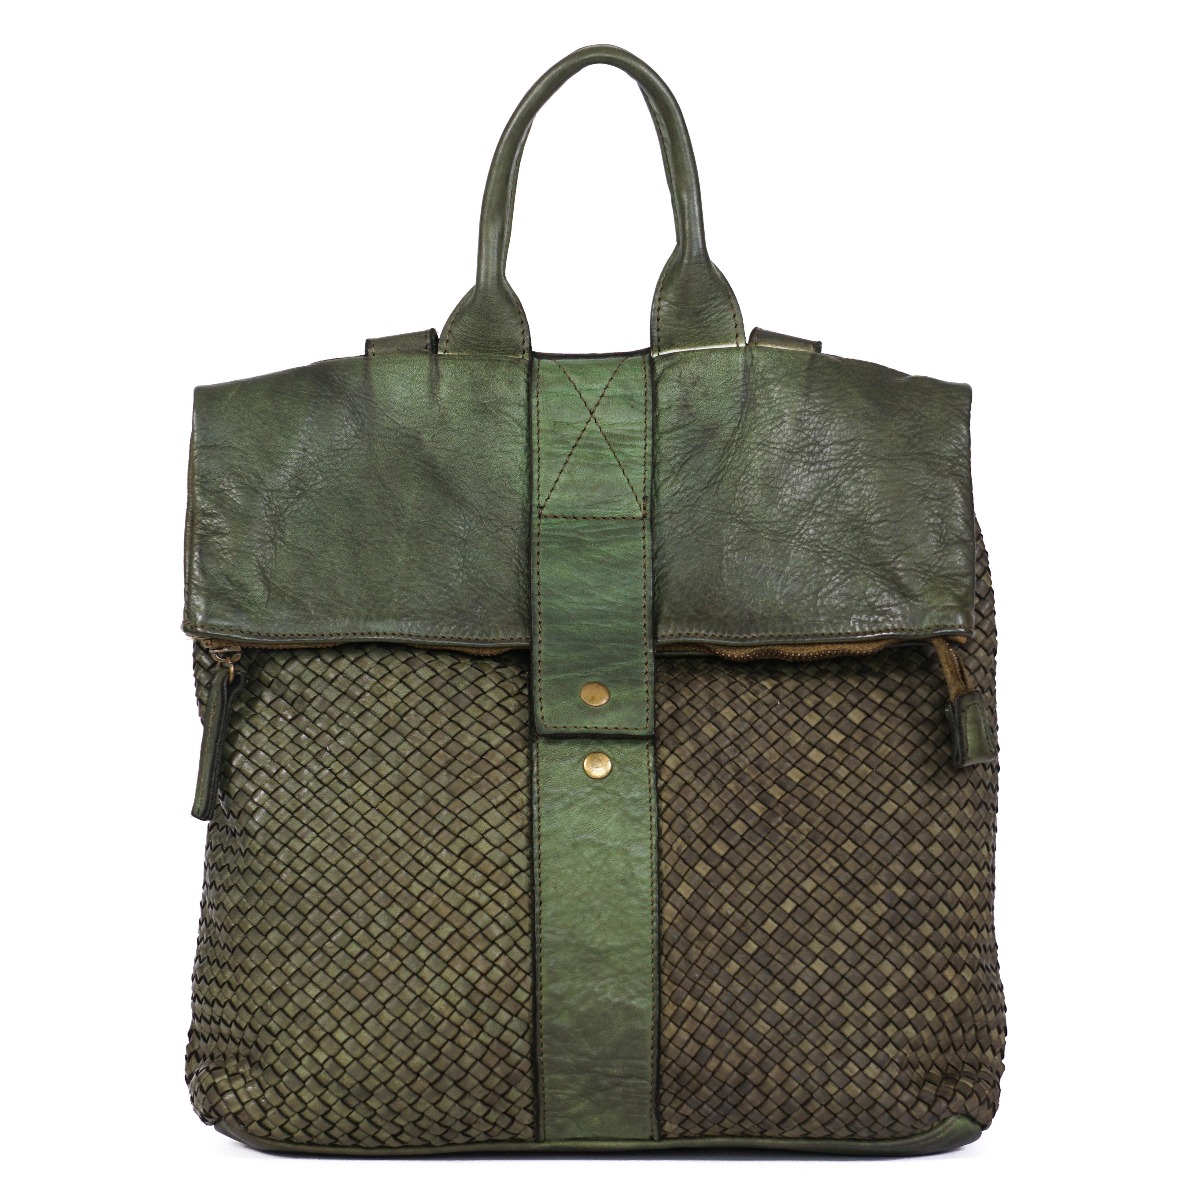 Woven leather tote backpack women